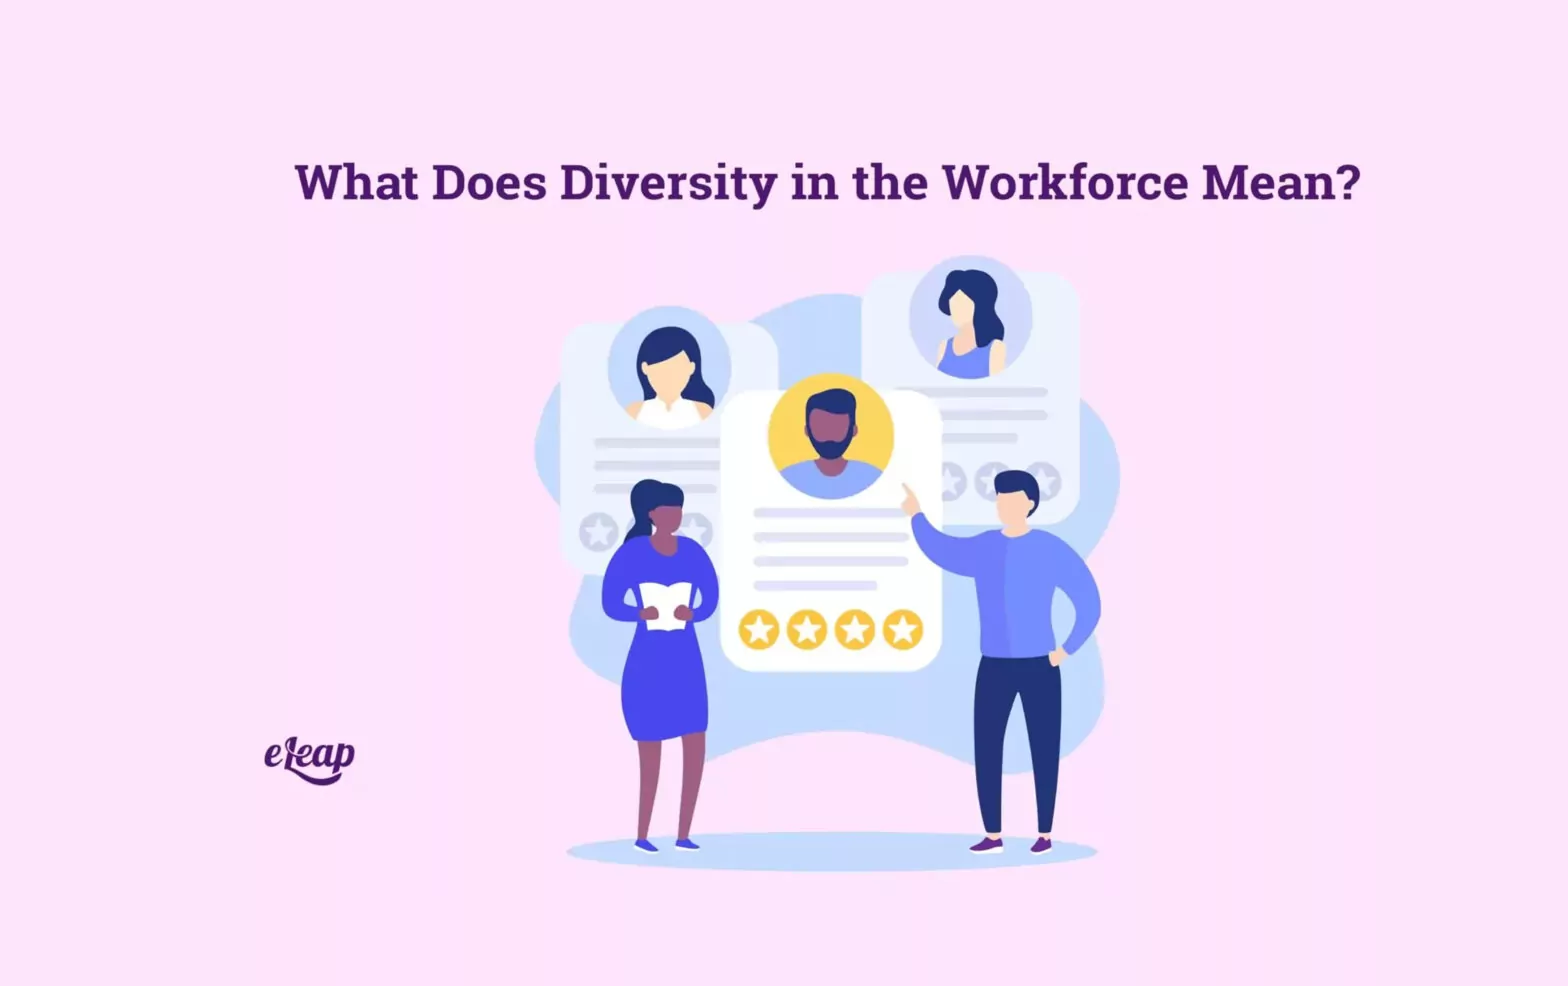 What Does Diversity Mean to You?